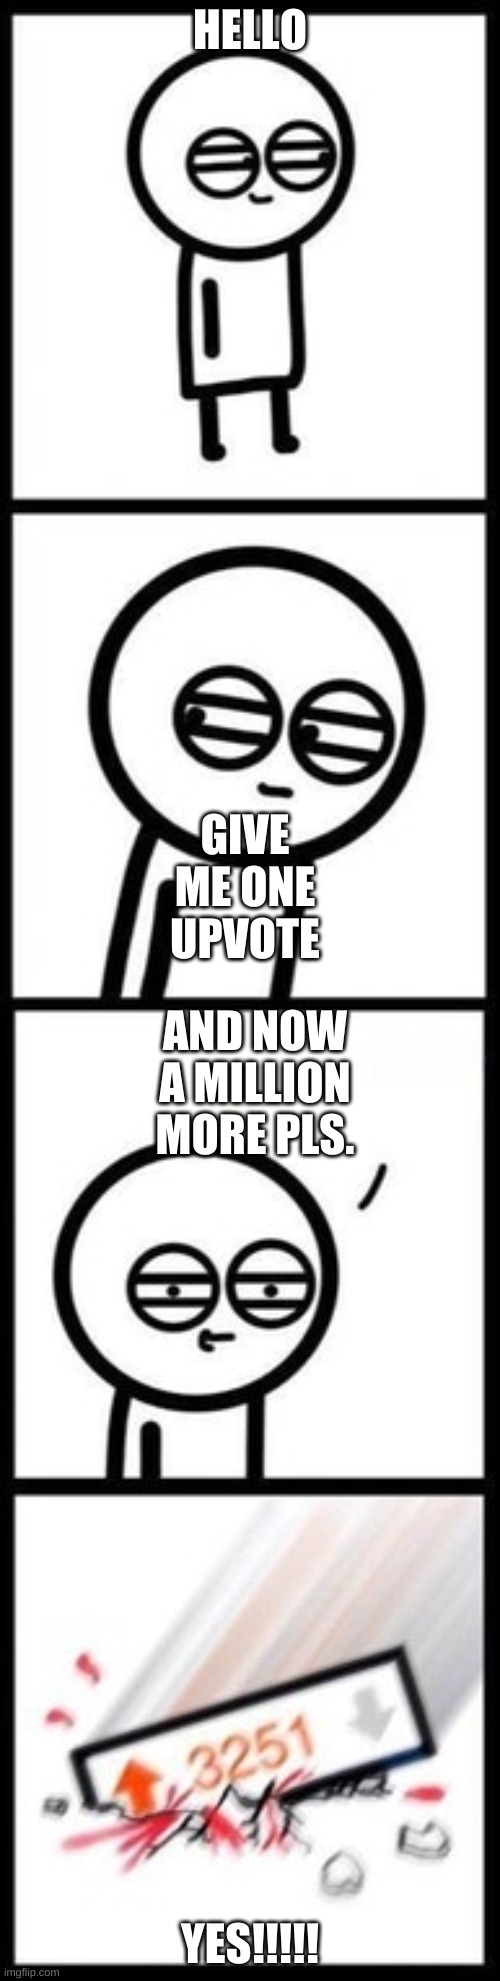 3251 upvotes | HELLO; GIVE ME ONE UPVOTE; AND NOW A MILLION MORE PLS. YES!!!!! | image tagged in 3251 upvotes | made w/ Imgflip meme maker